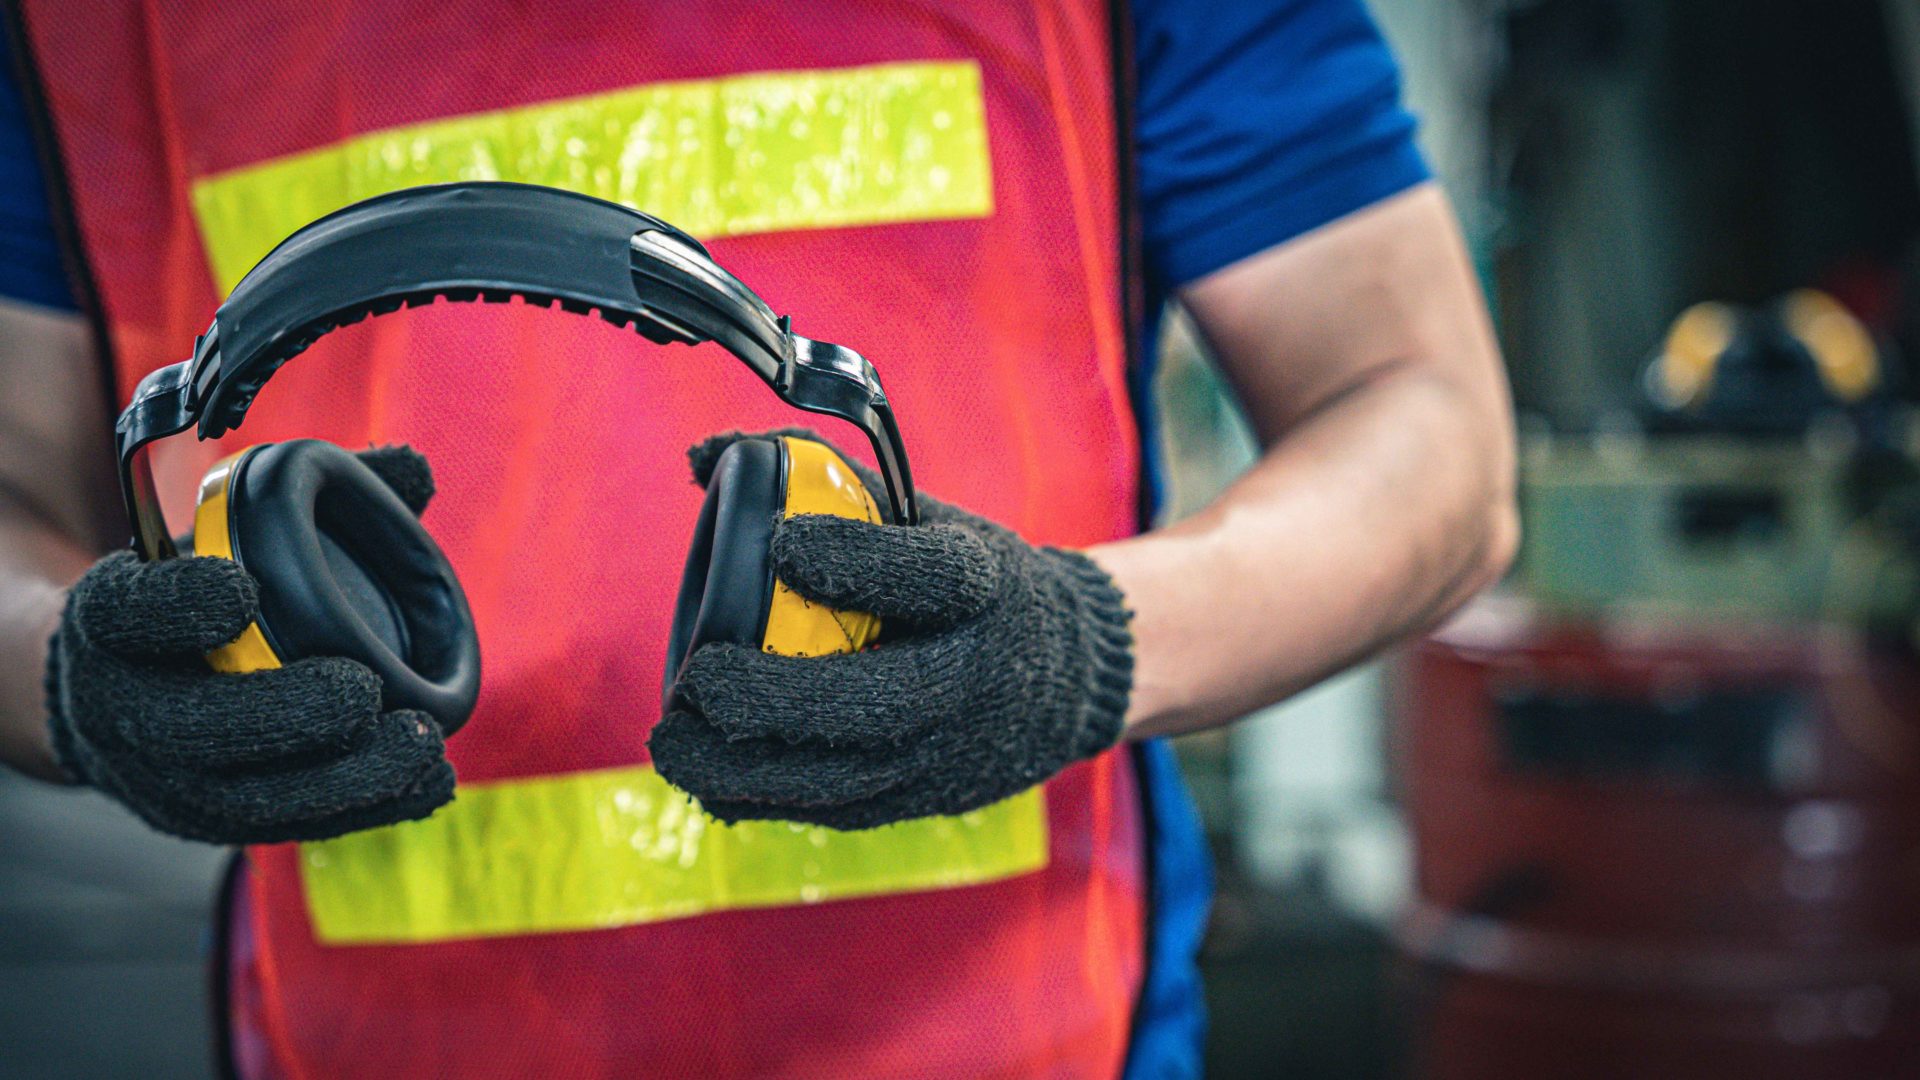 male worker holding headphones to protect hearing in loud enviroment